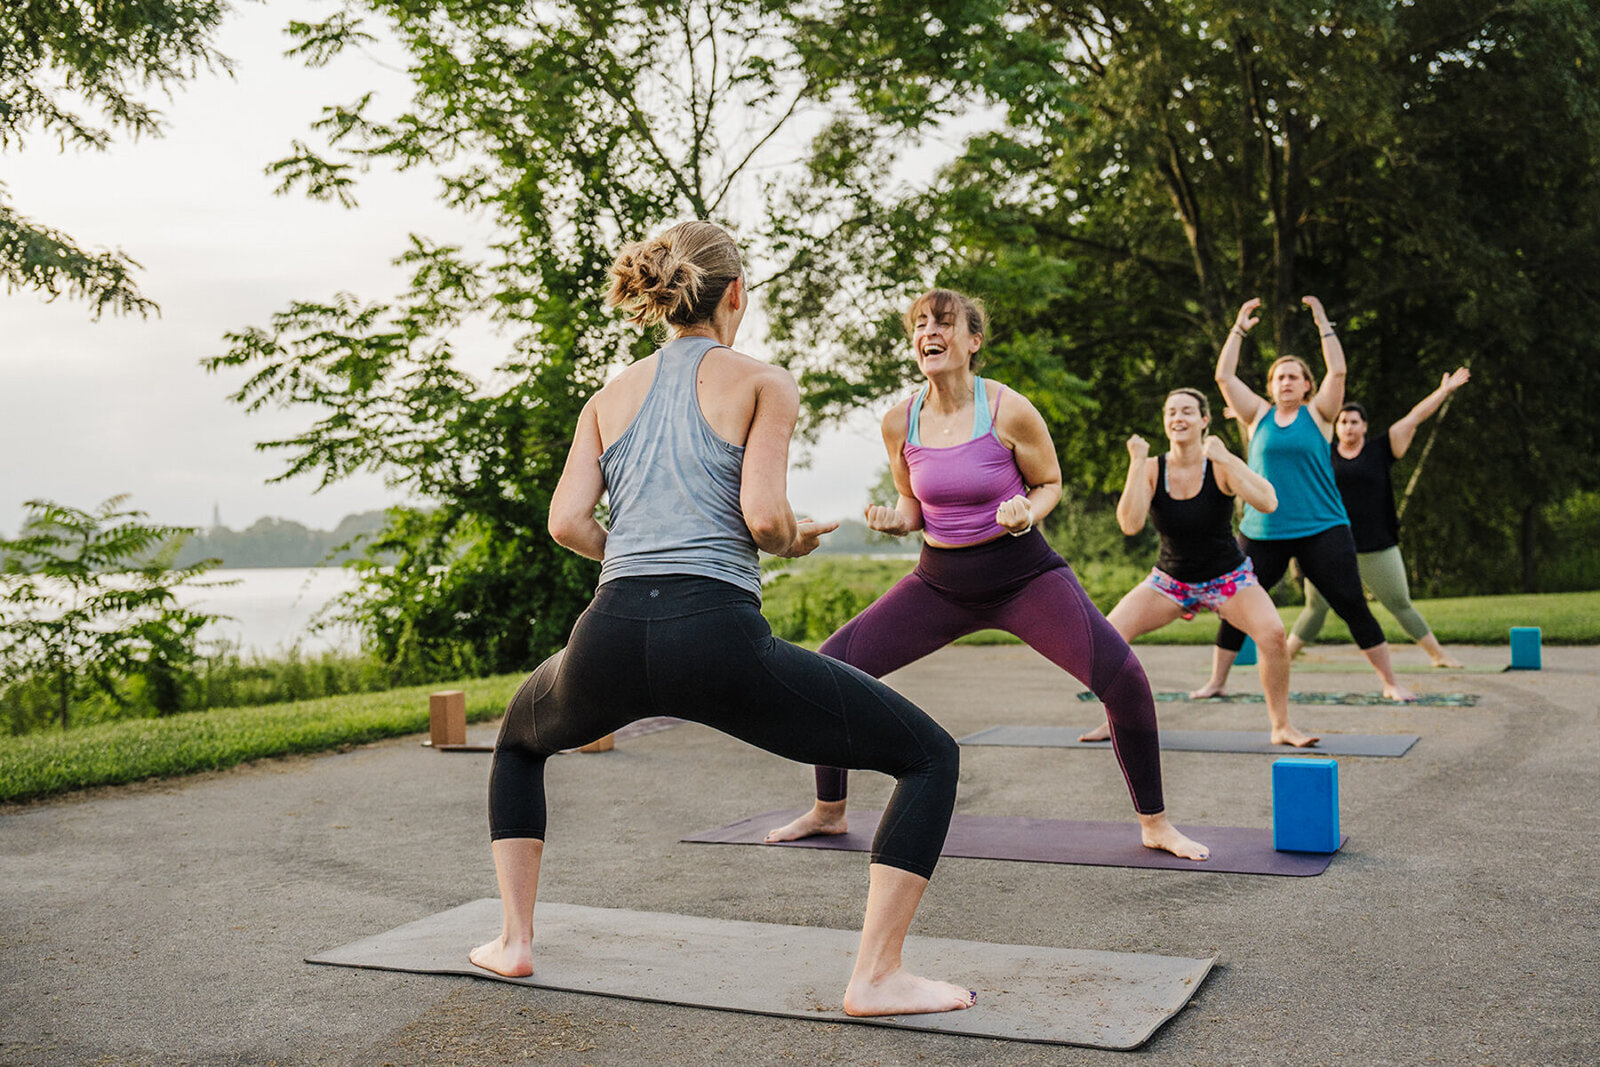 woman yells with joy during outdoor yoga class